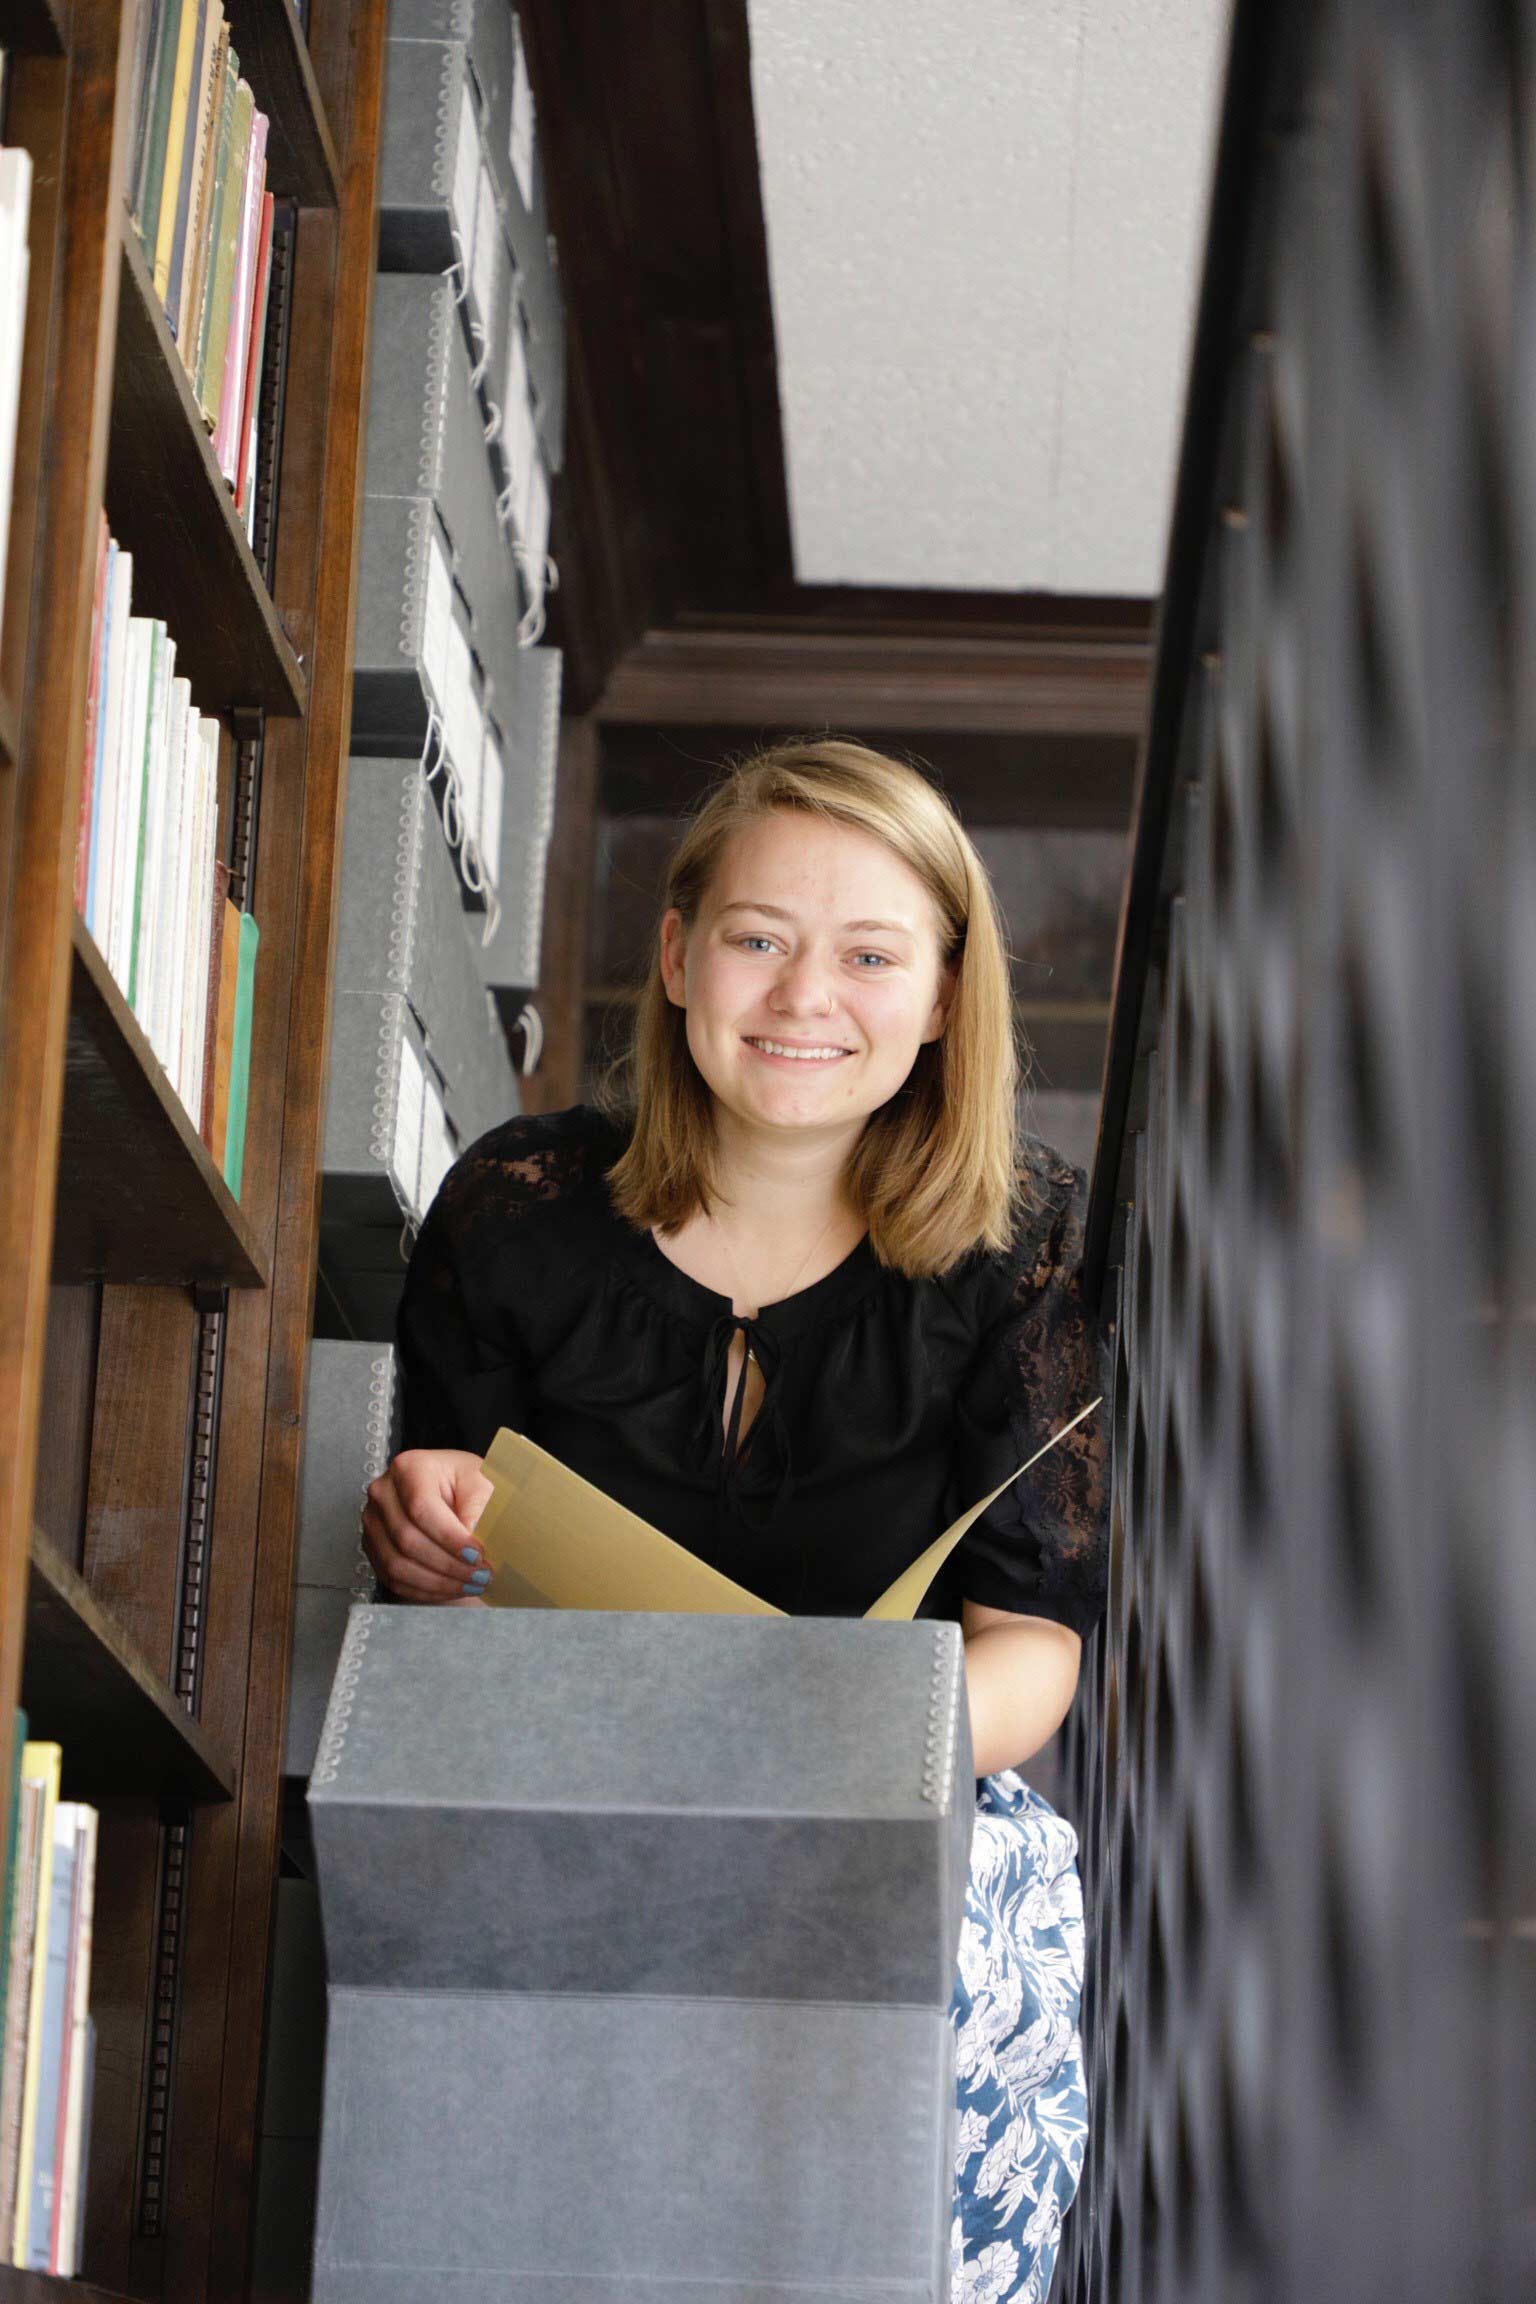 Rachel Murray crouches behind a box of files in a library and smiles.